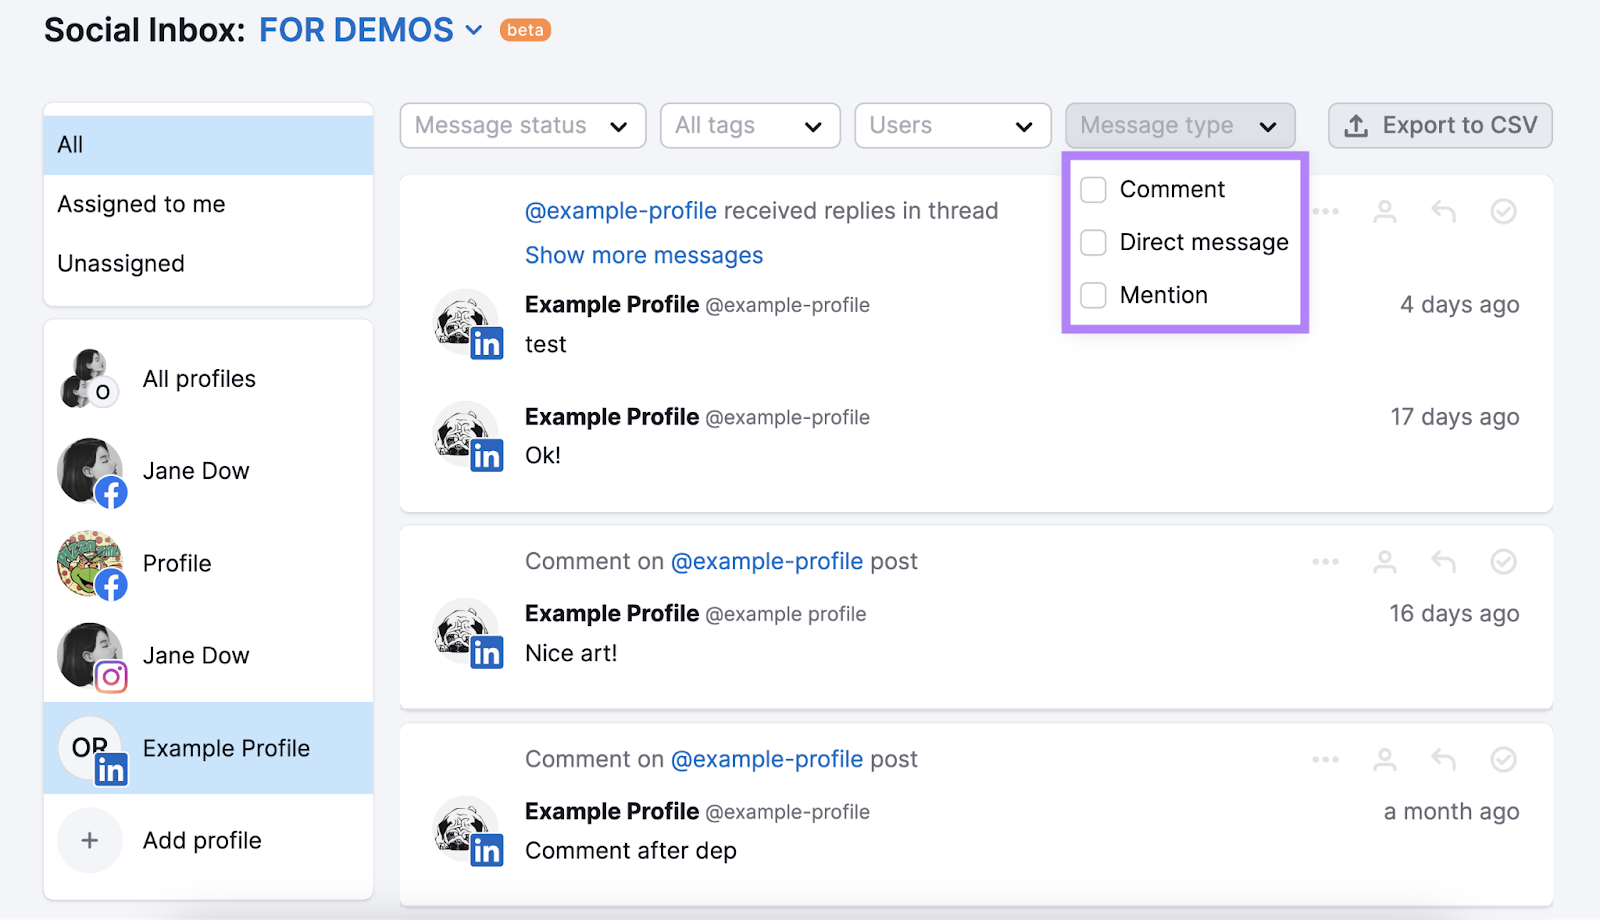 Semrush Social Inbox tool showing LinkedIn interface with comments, DMs and mentions displayed